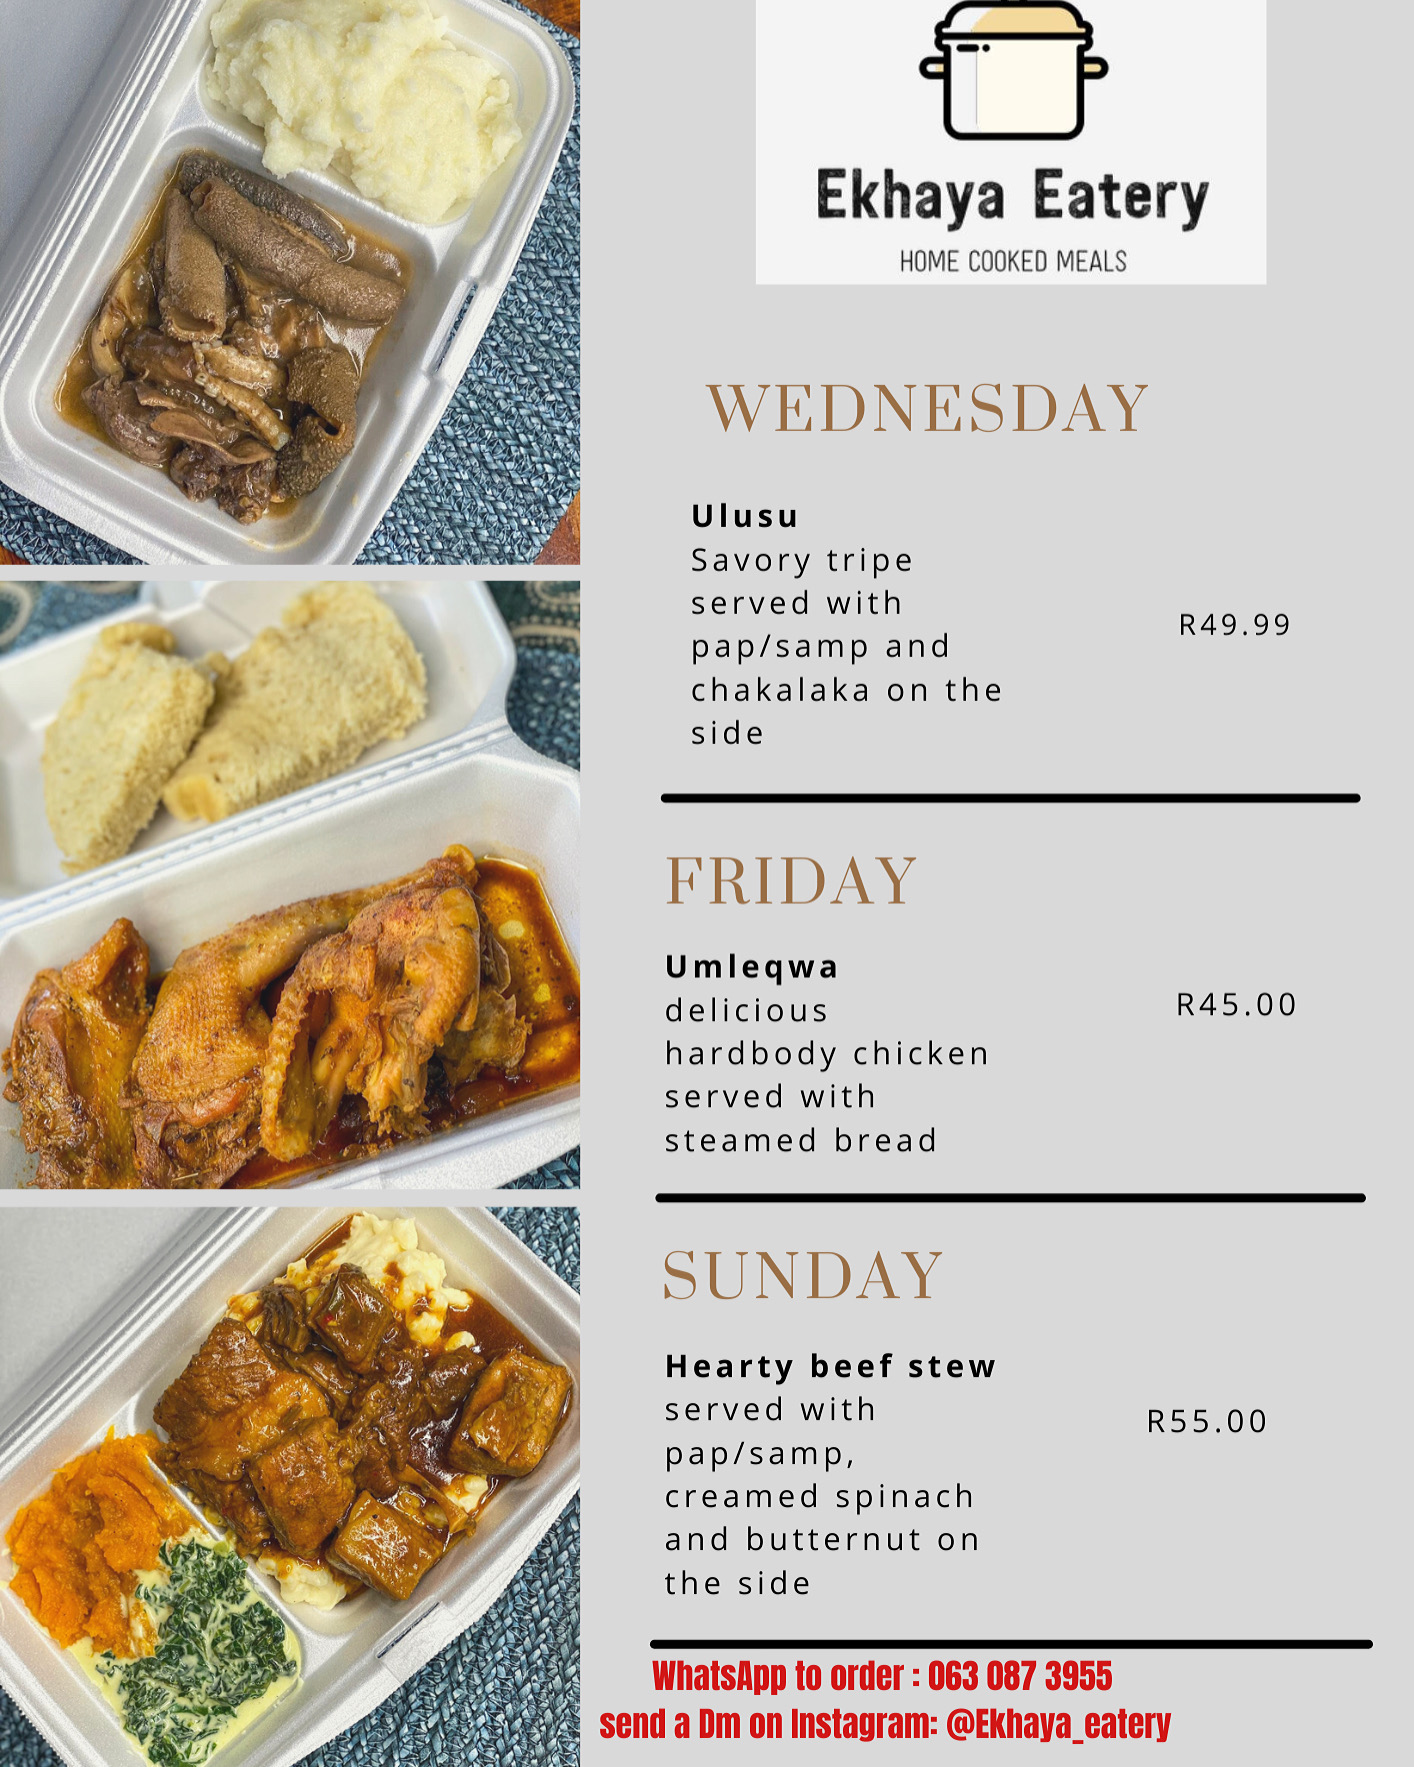 Contact us for more information and feel free to check us on Instagram @ekhaya_eatery